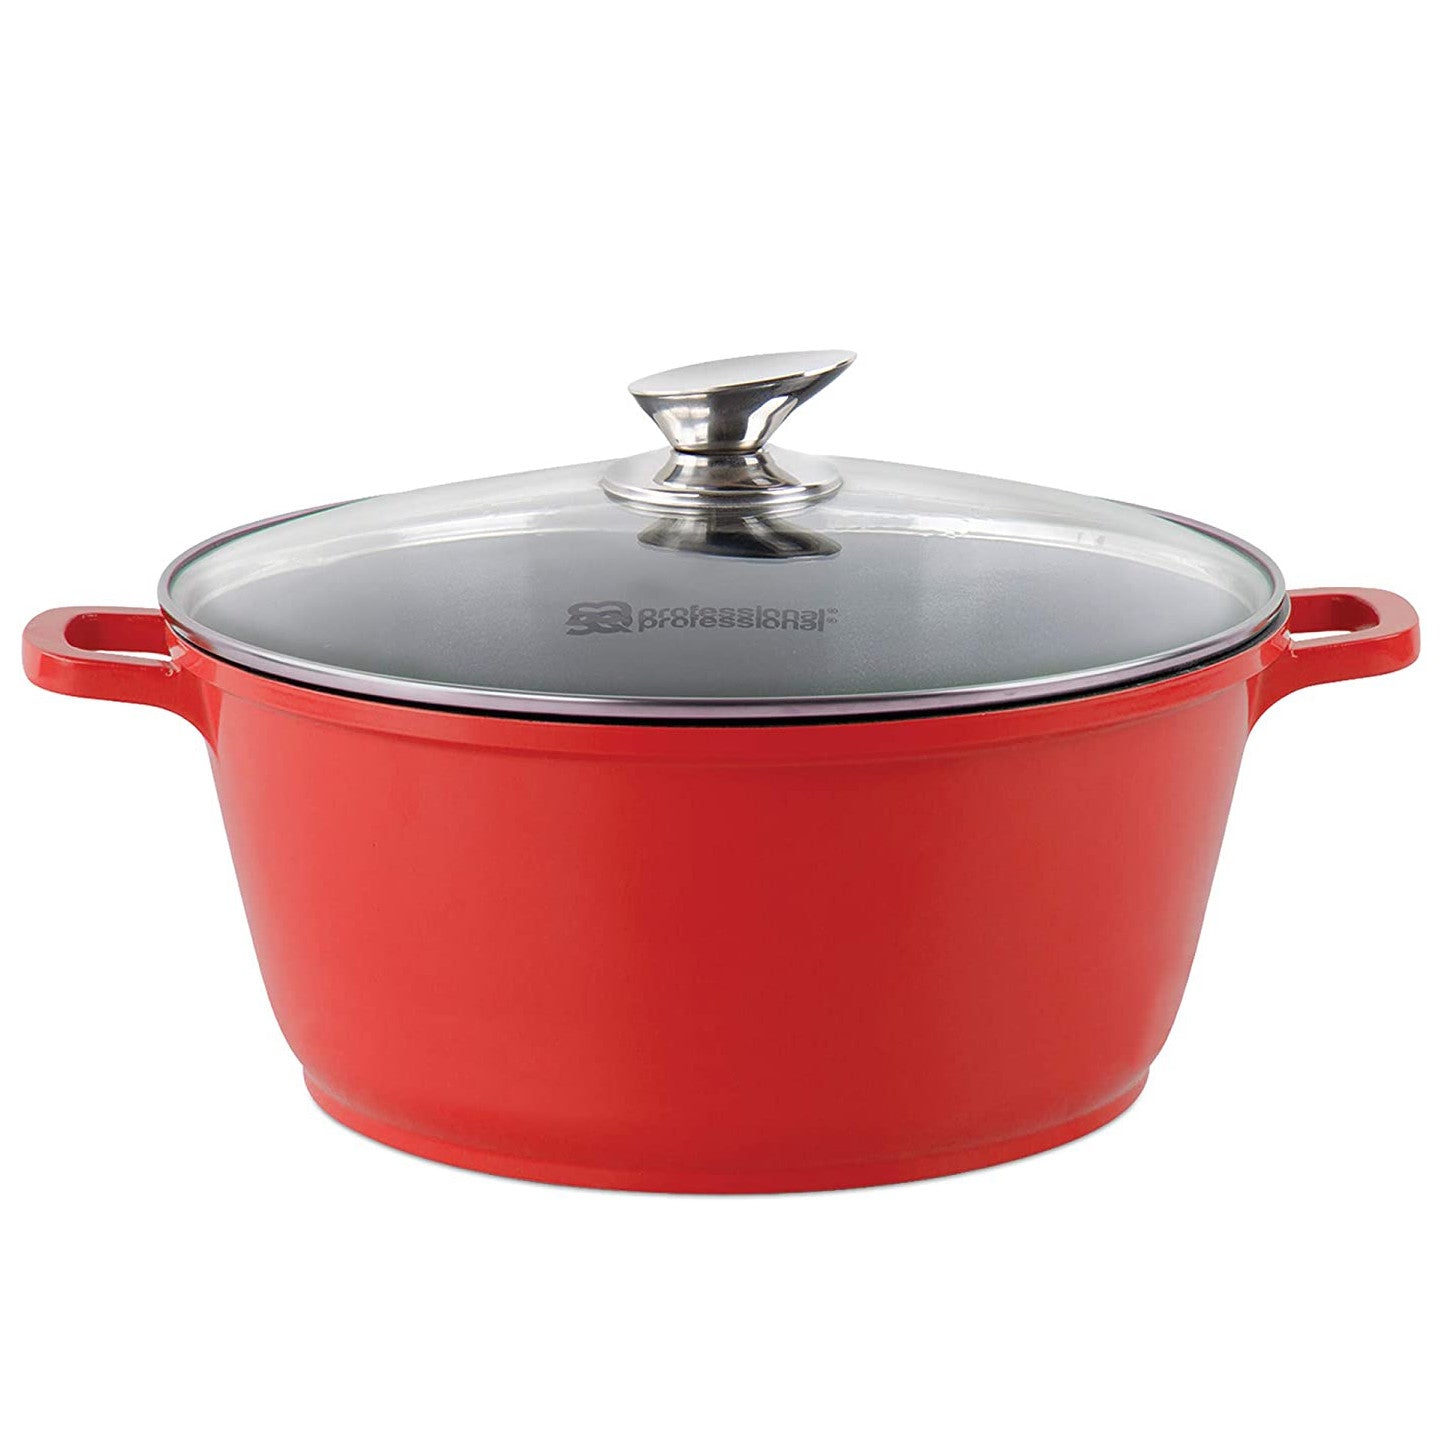 Die Cast Stockpot - Induction Base - NEA - Red- 28cm